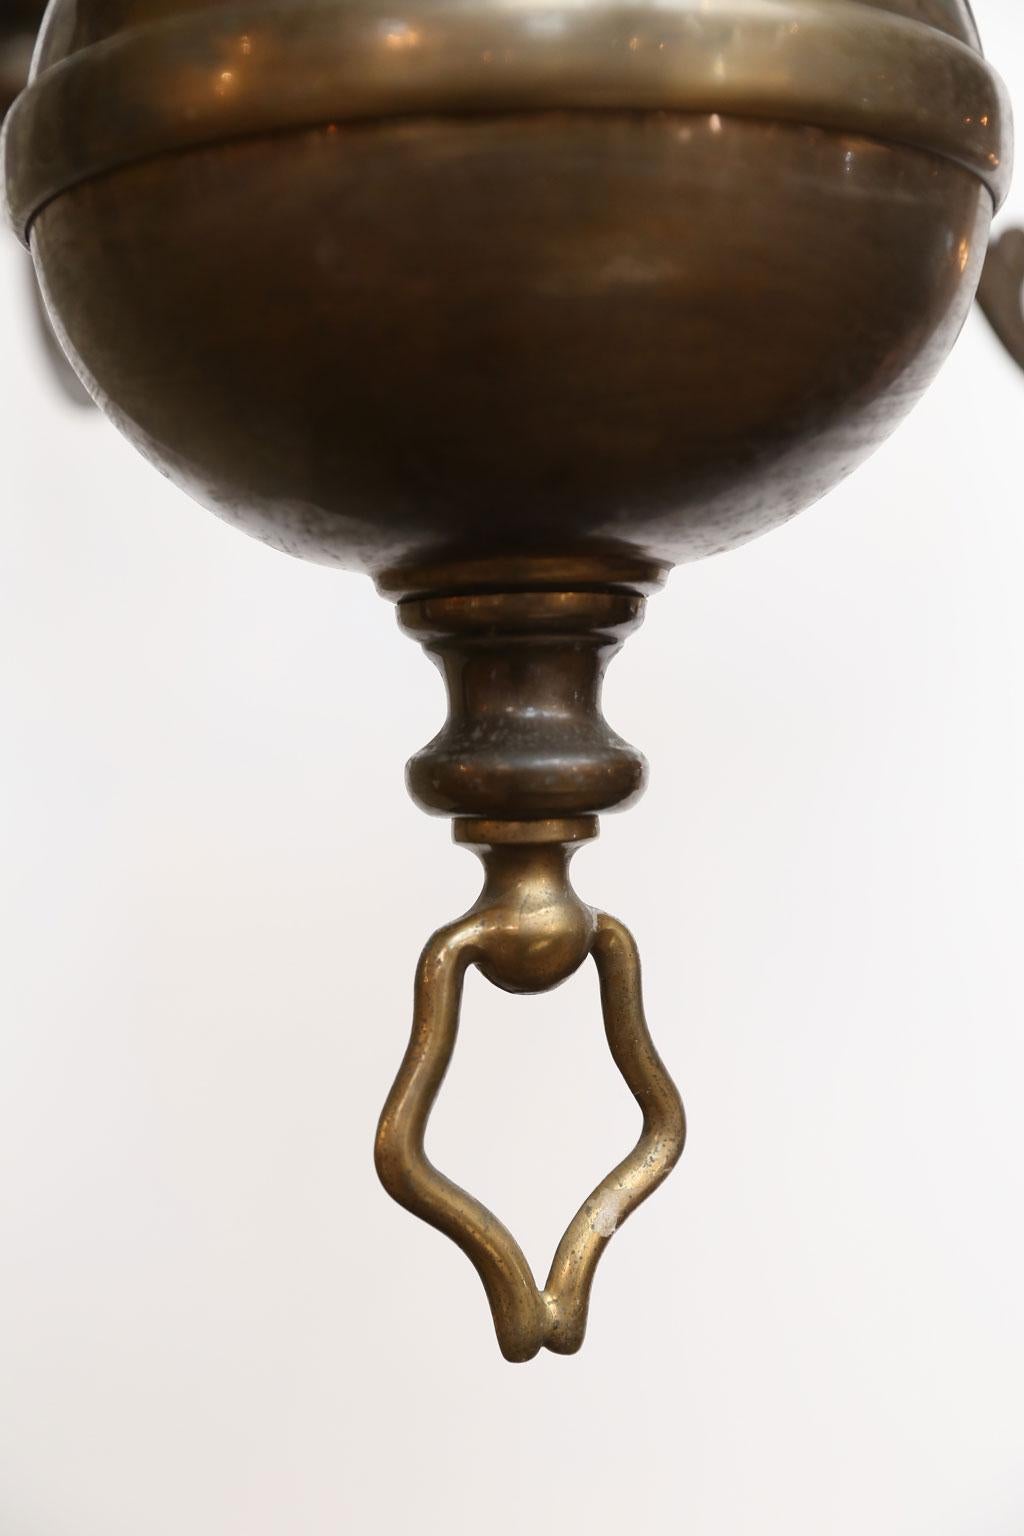 Antique Bronze Georgian-Style Chandelier with Flat Arms and Beautiful Patina 1